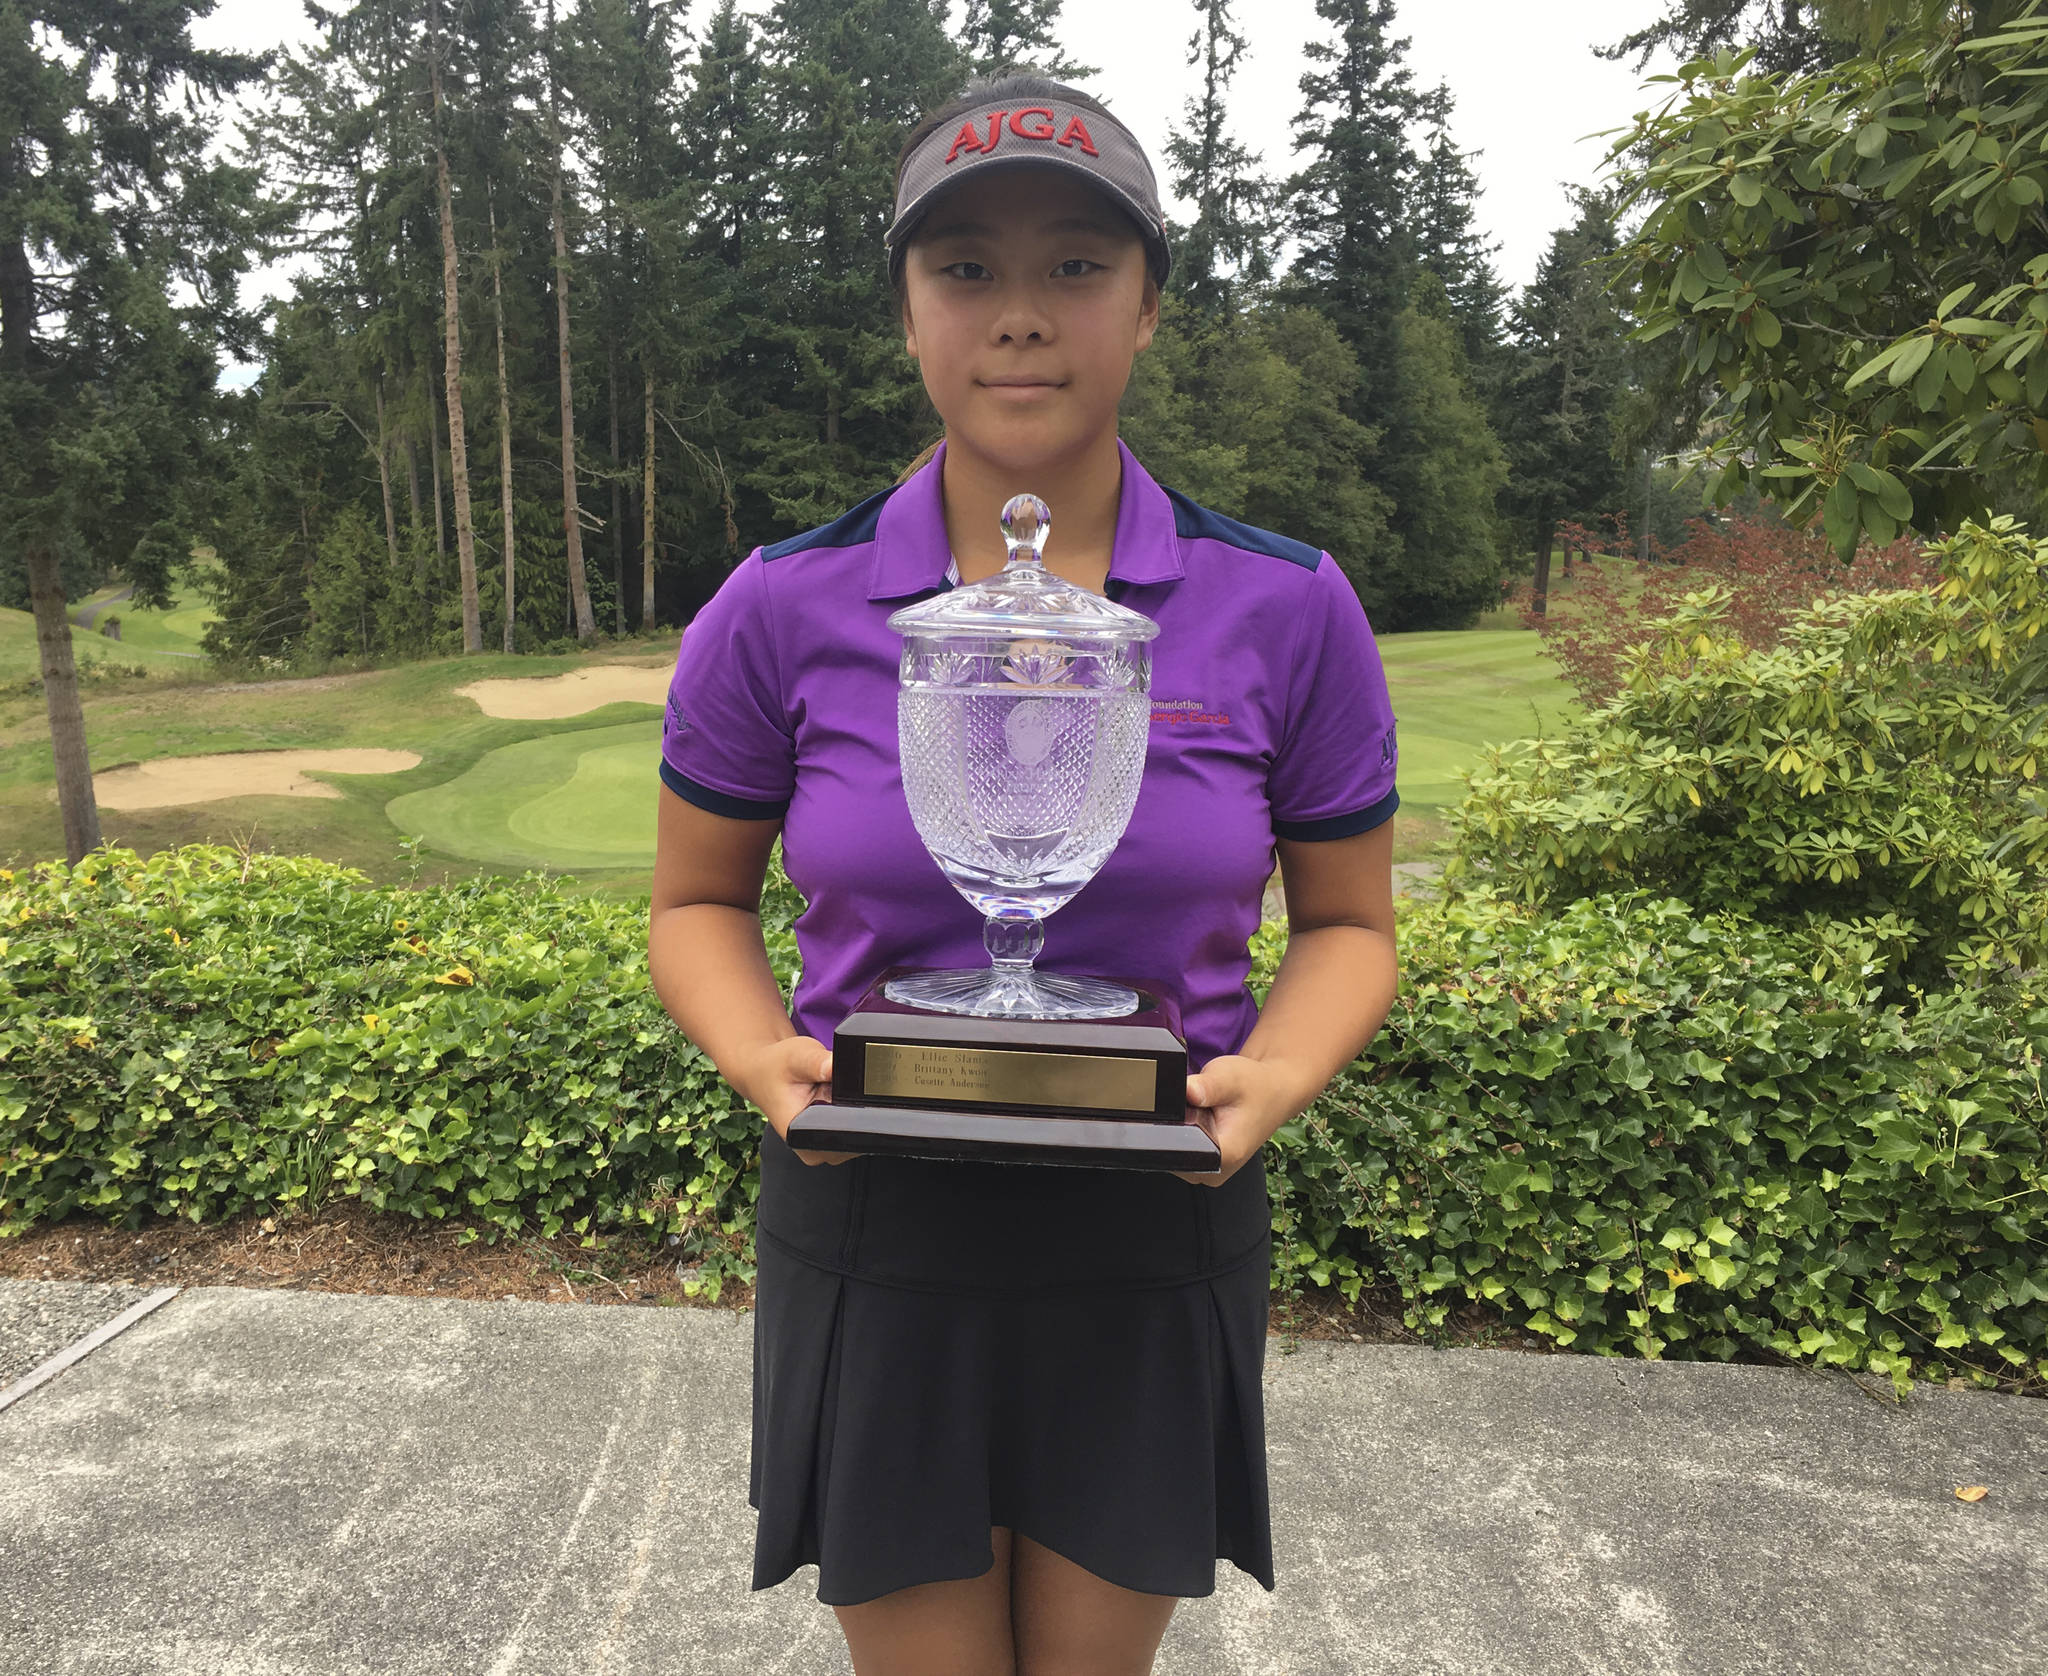 Gihoe Seo displays the trophy after winning the Pacific Northwest Golf Association Junior Girls Amateur Championship in Port Ludlow. Courtesy photo